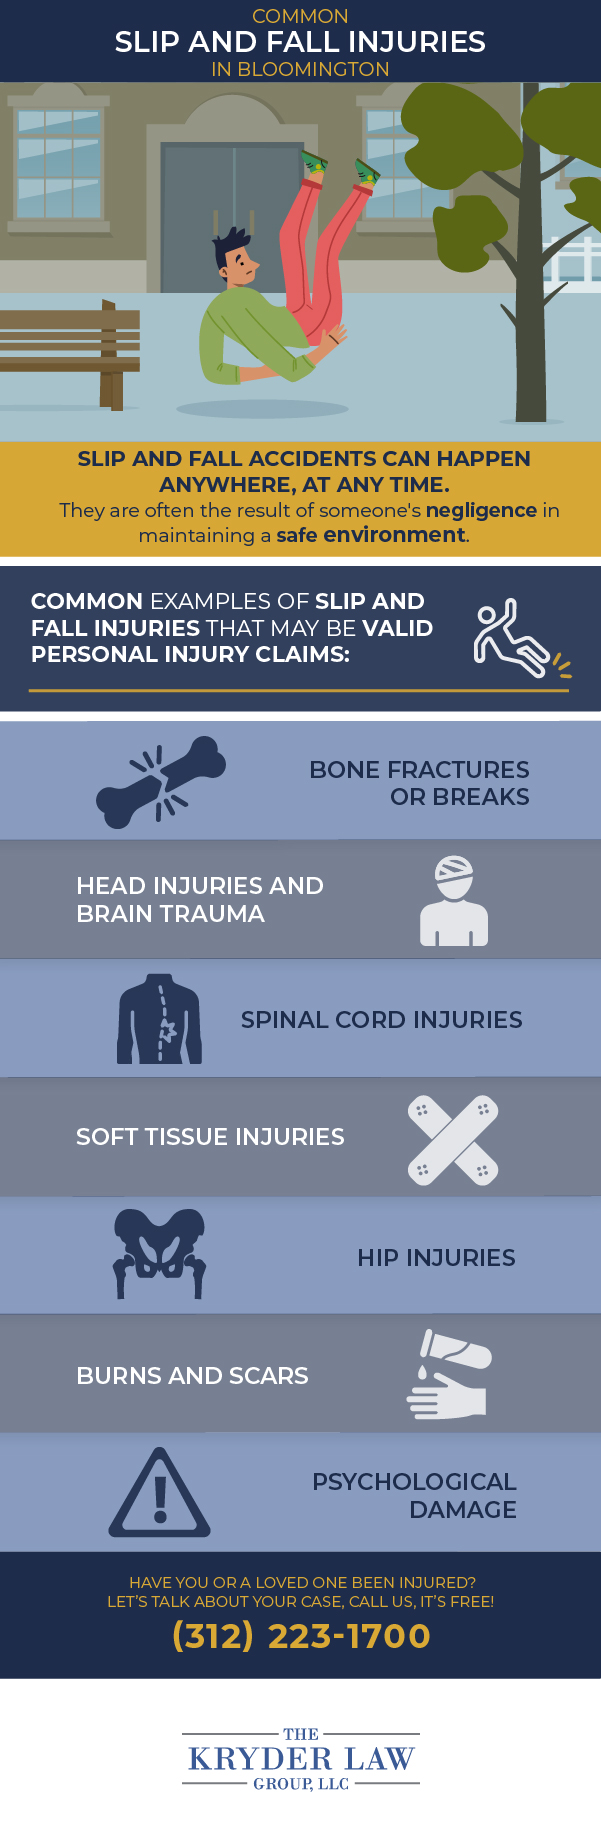 The Benefits of Hiring a Bloomington Slip and Fall Injury Lawyer Infographic